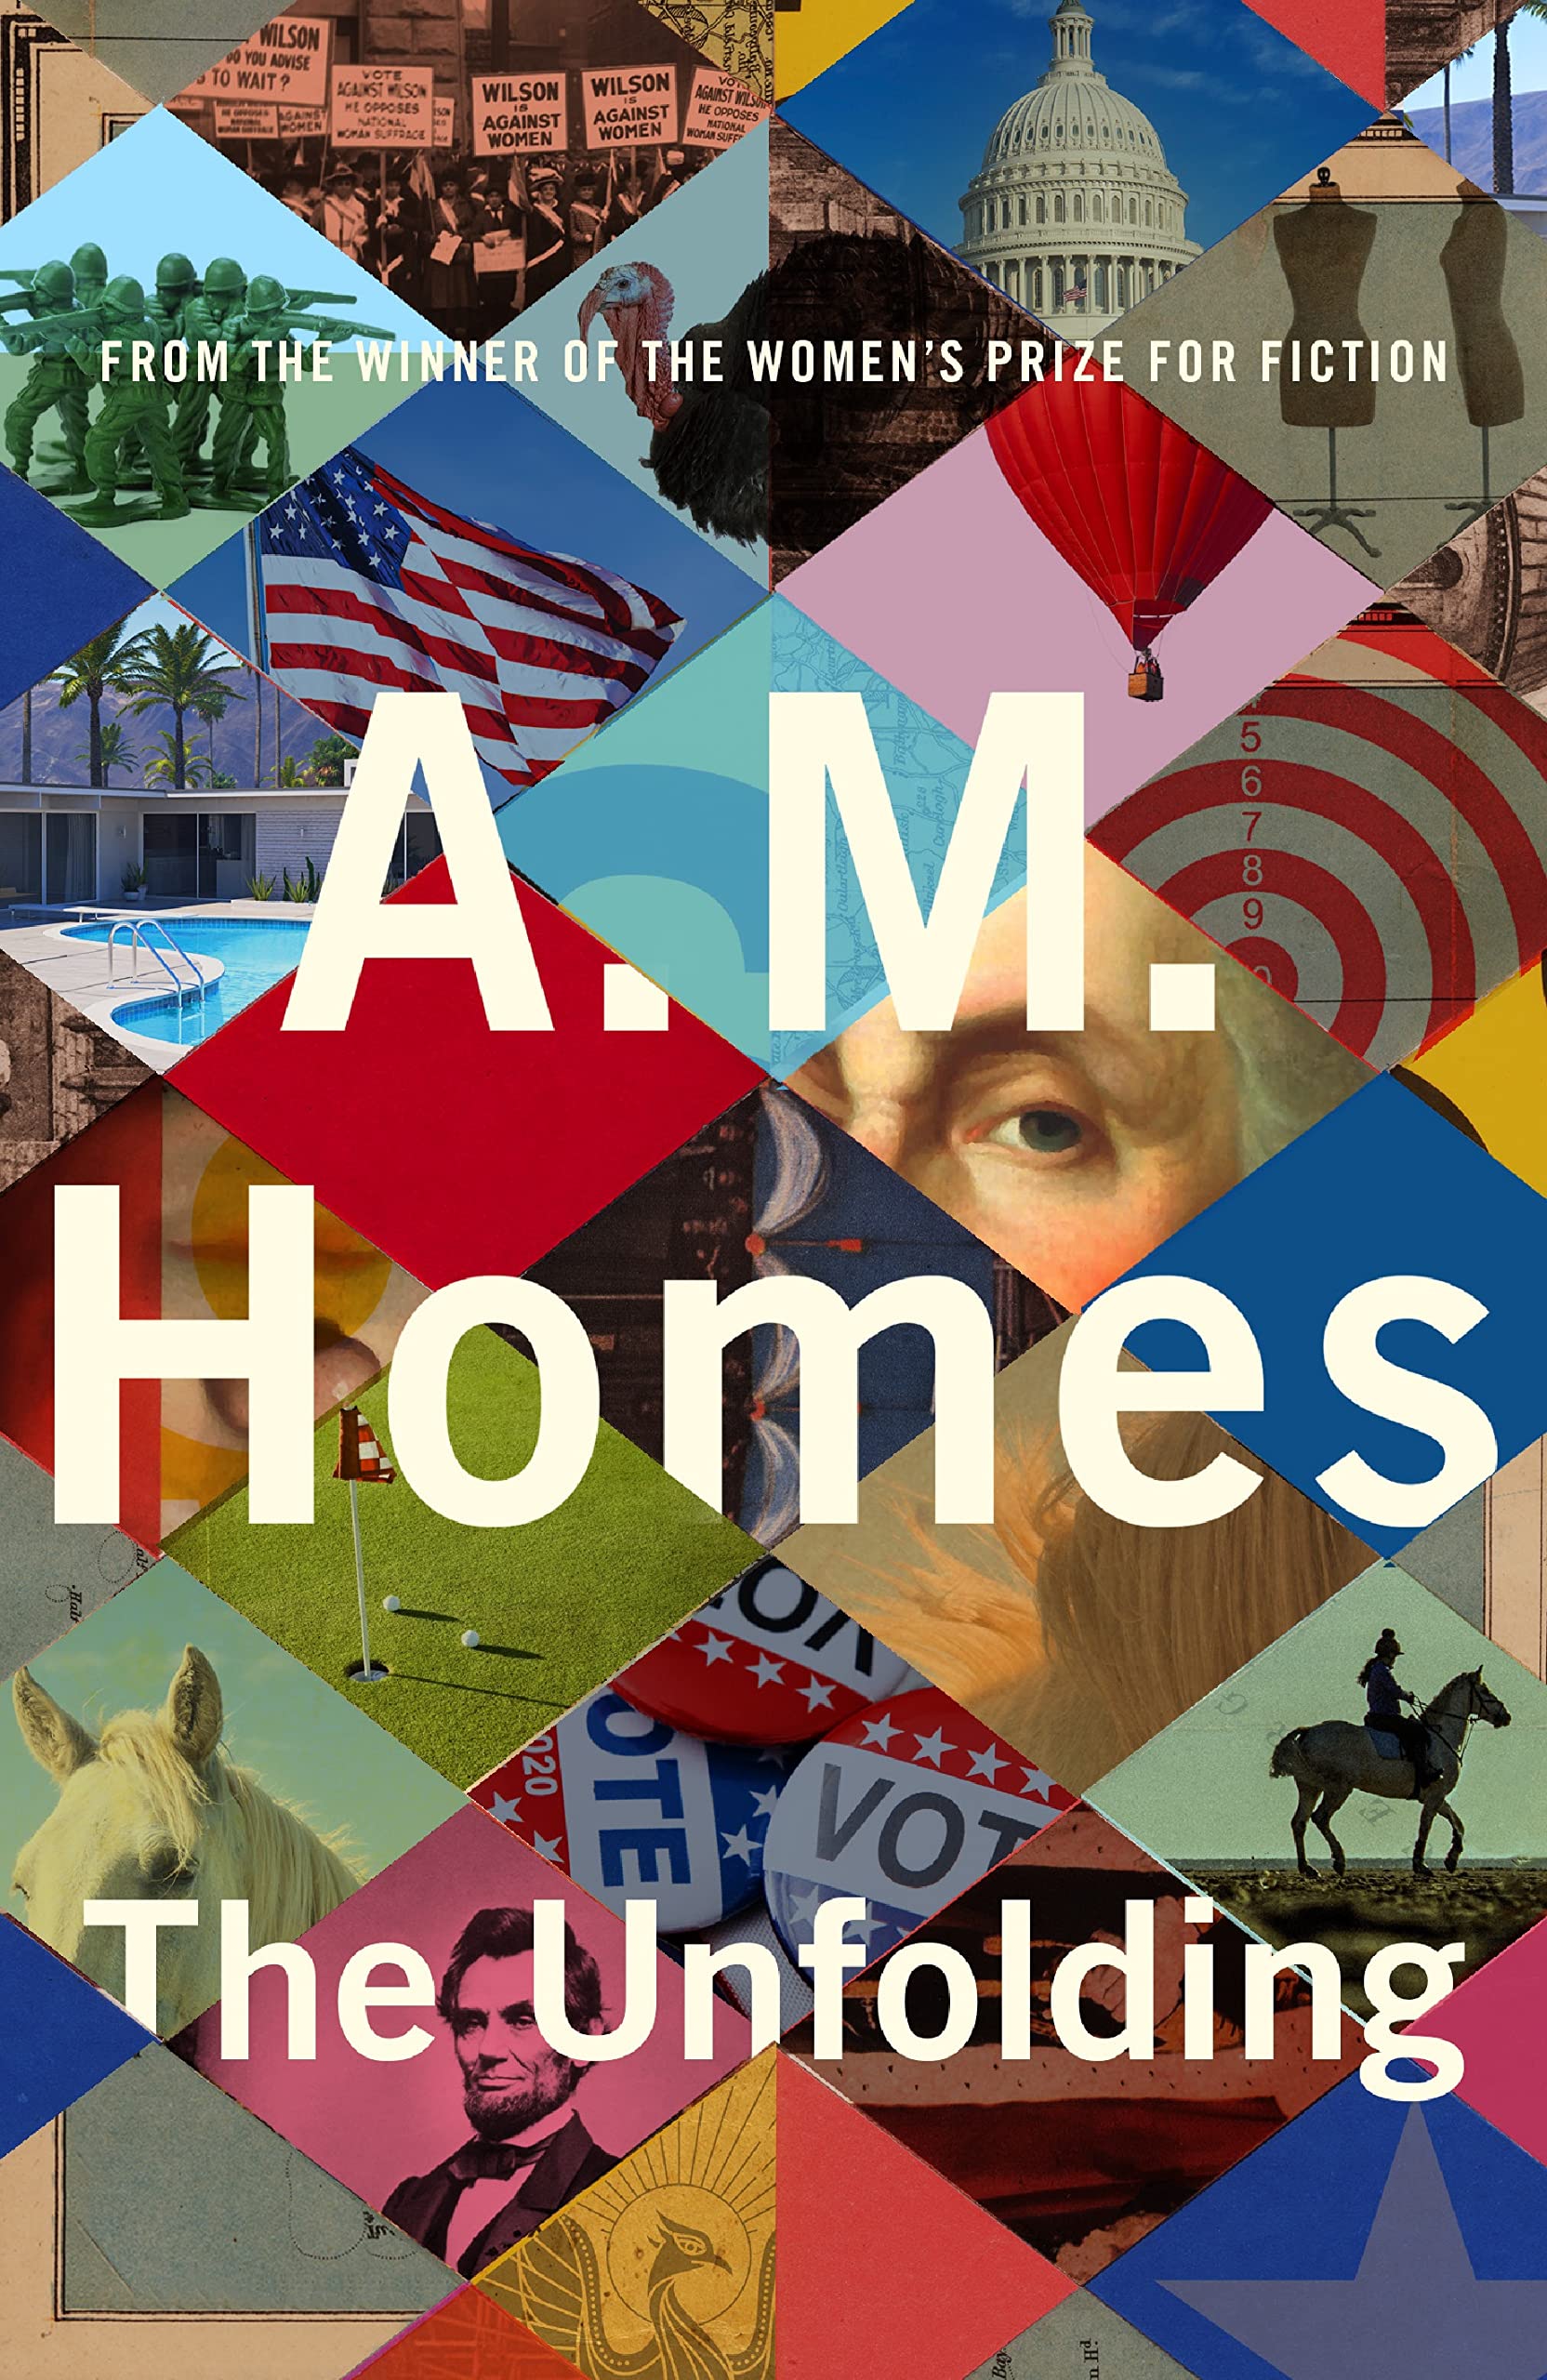 AM Homes’s ‘The Unfolding’